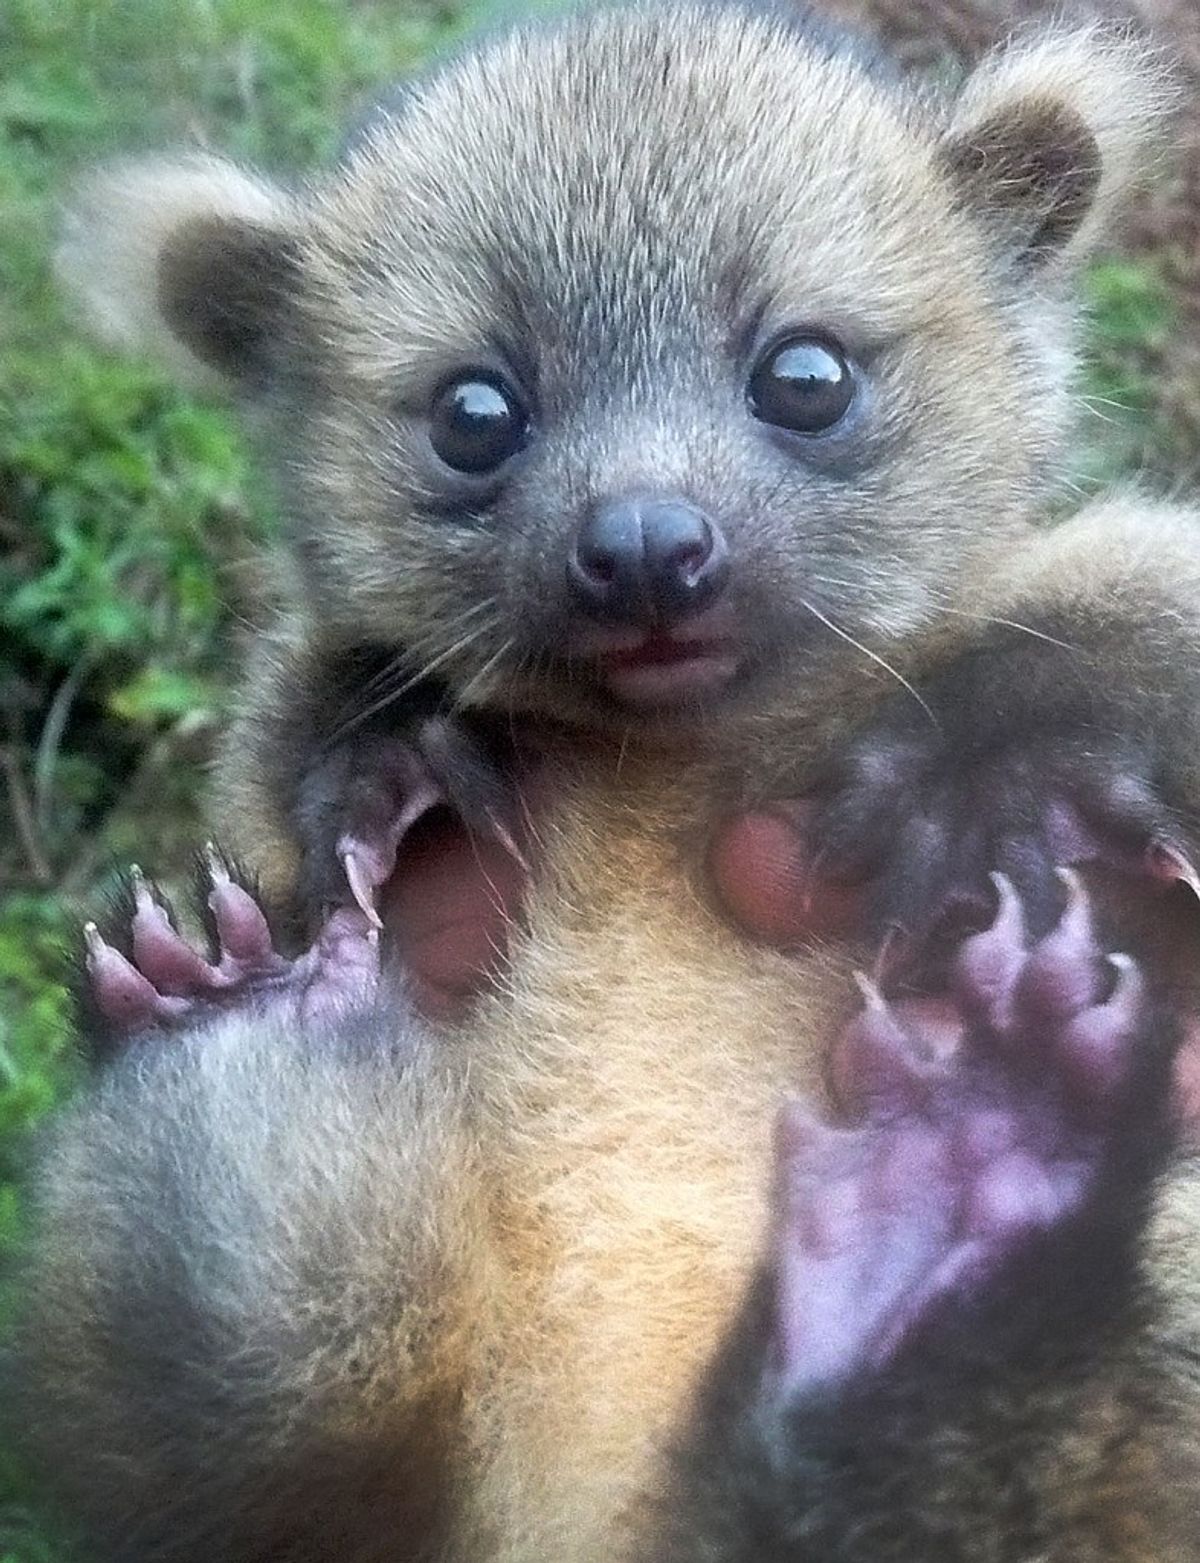 We now have baby pictures of the newly discovered olinguito 